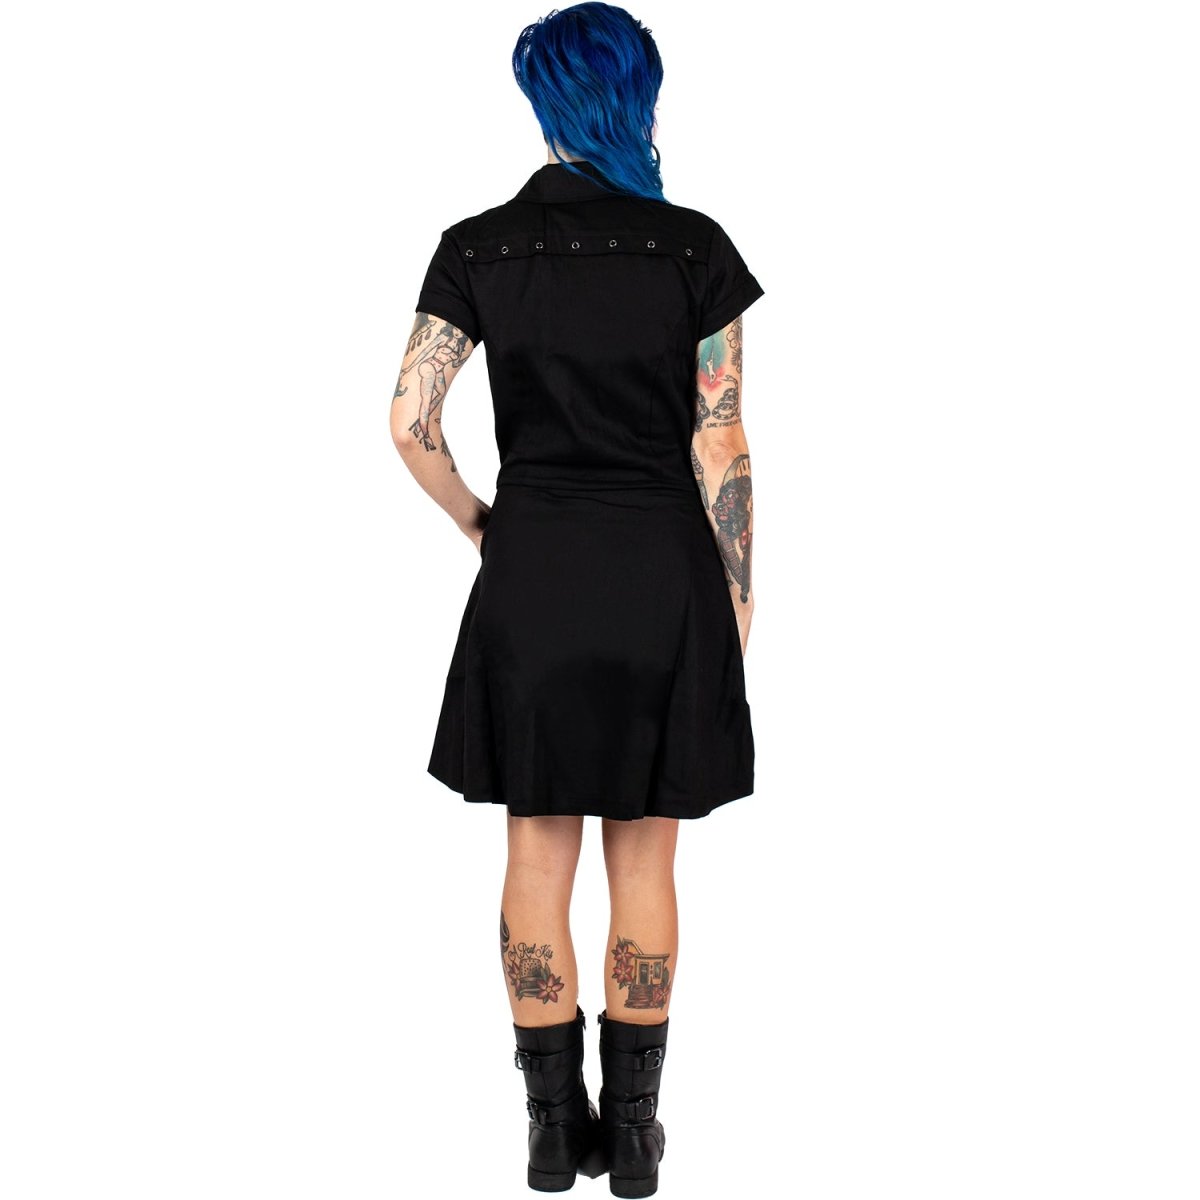 Too Fast | Orchid Bloom | Black Gothic Zipper Dress